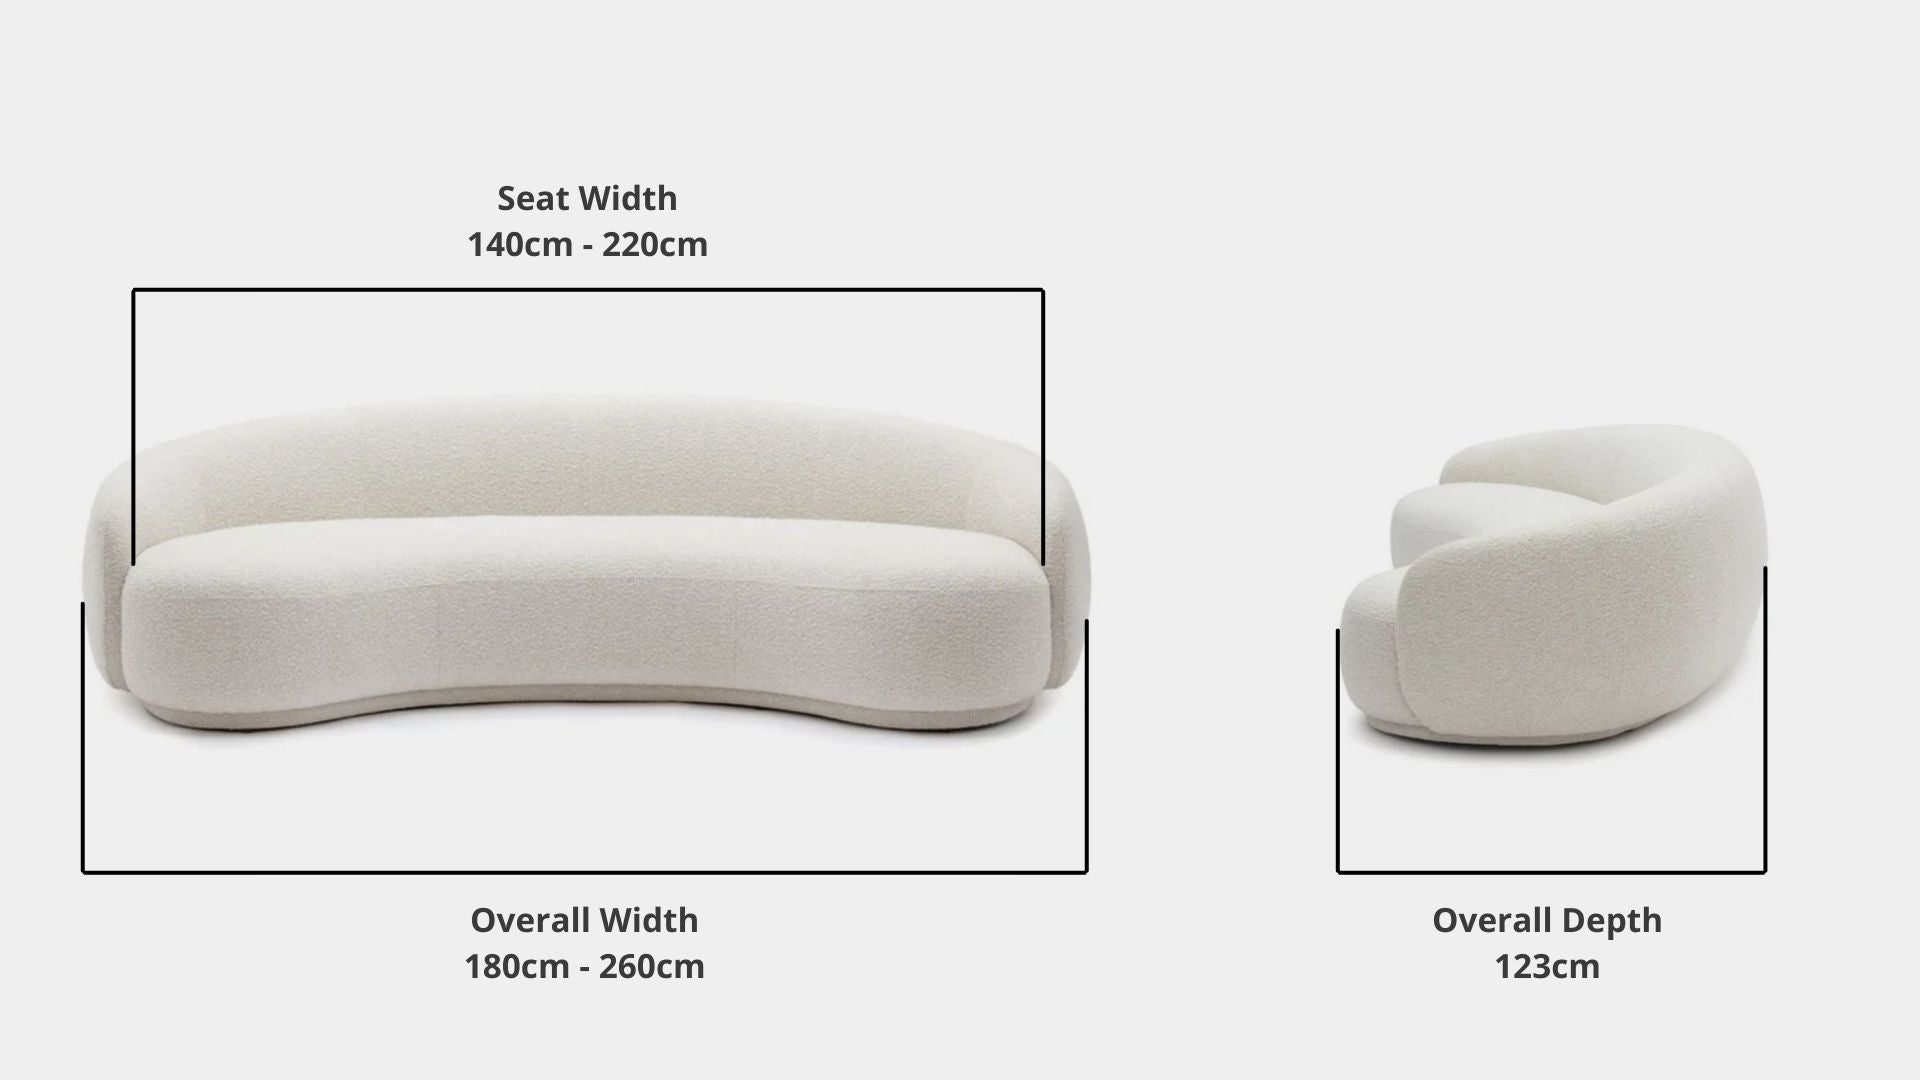 Details the key dimensions in terms of overall width, overall depth and seat width for Cashew Fabric Sofa